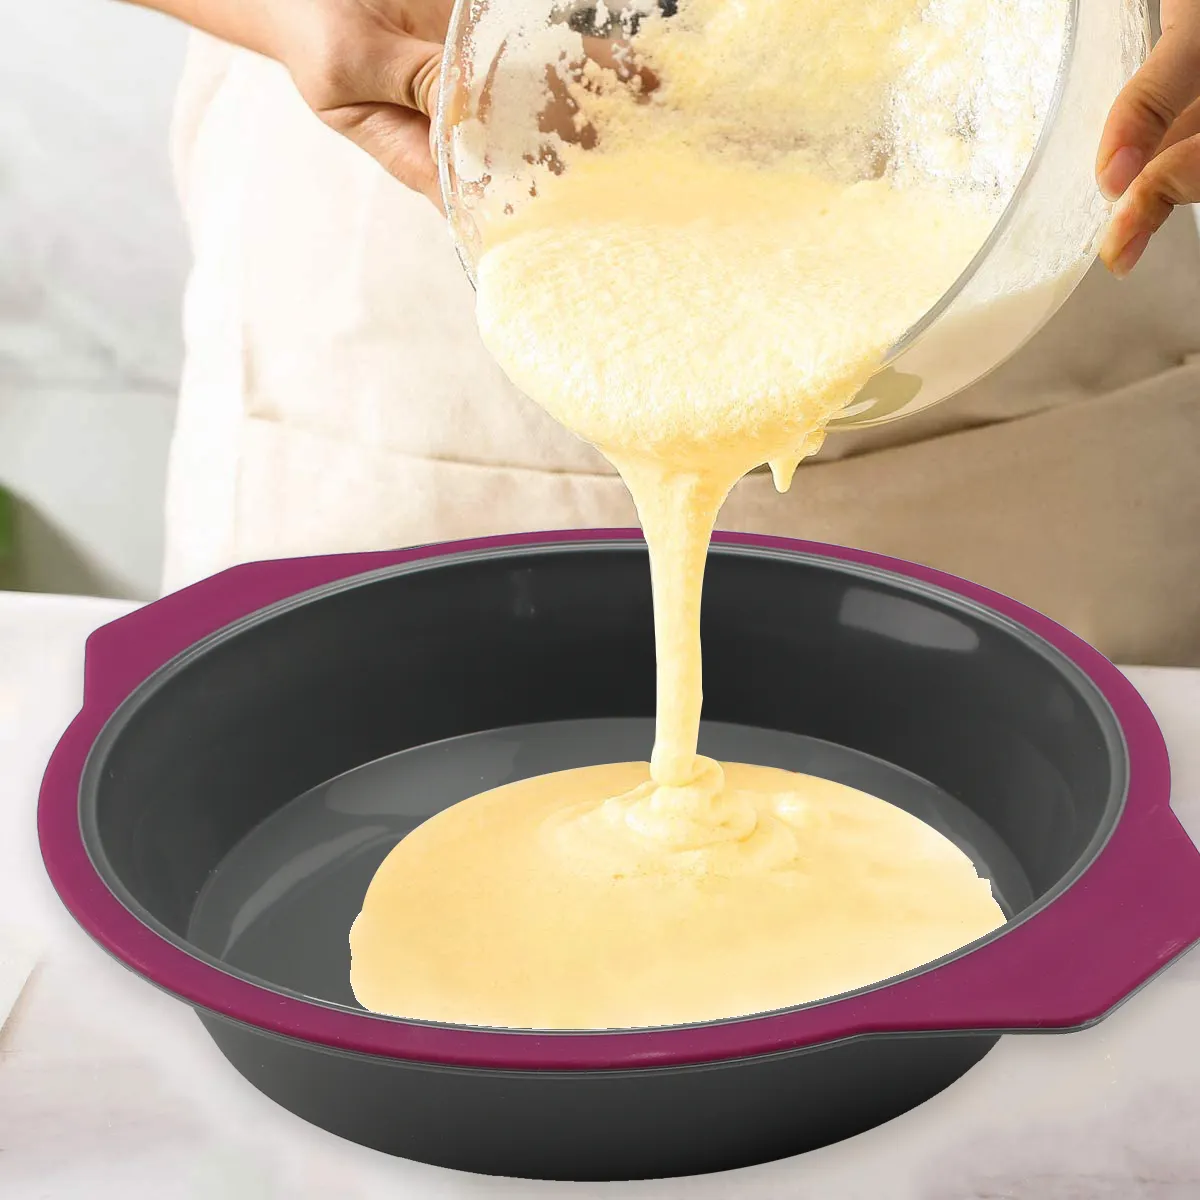 Silicone Round Cake Pan Nonstick Pound Mold for Baking Food Grade Round Cake Bakeware with Handles for Baking